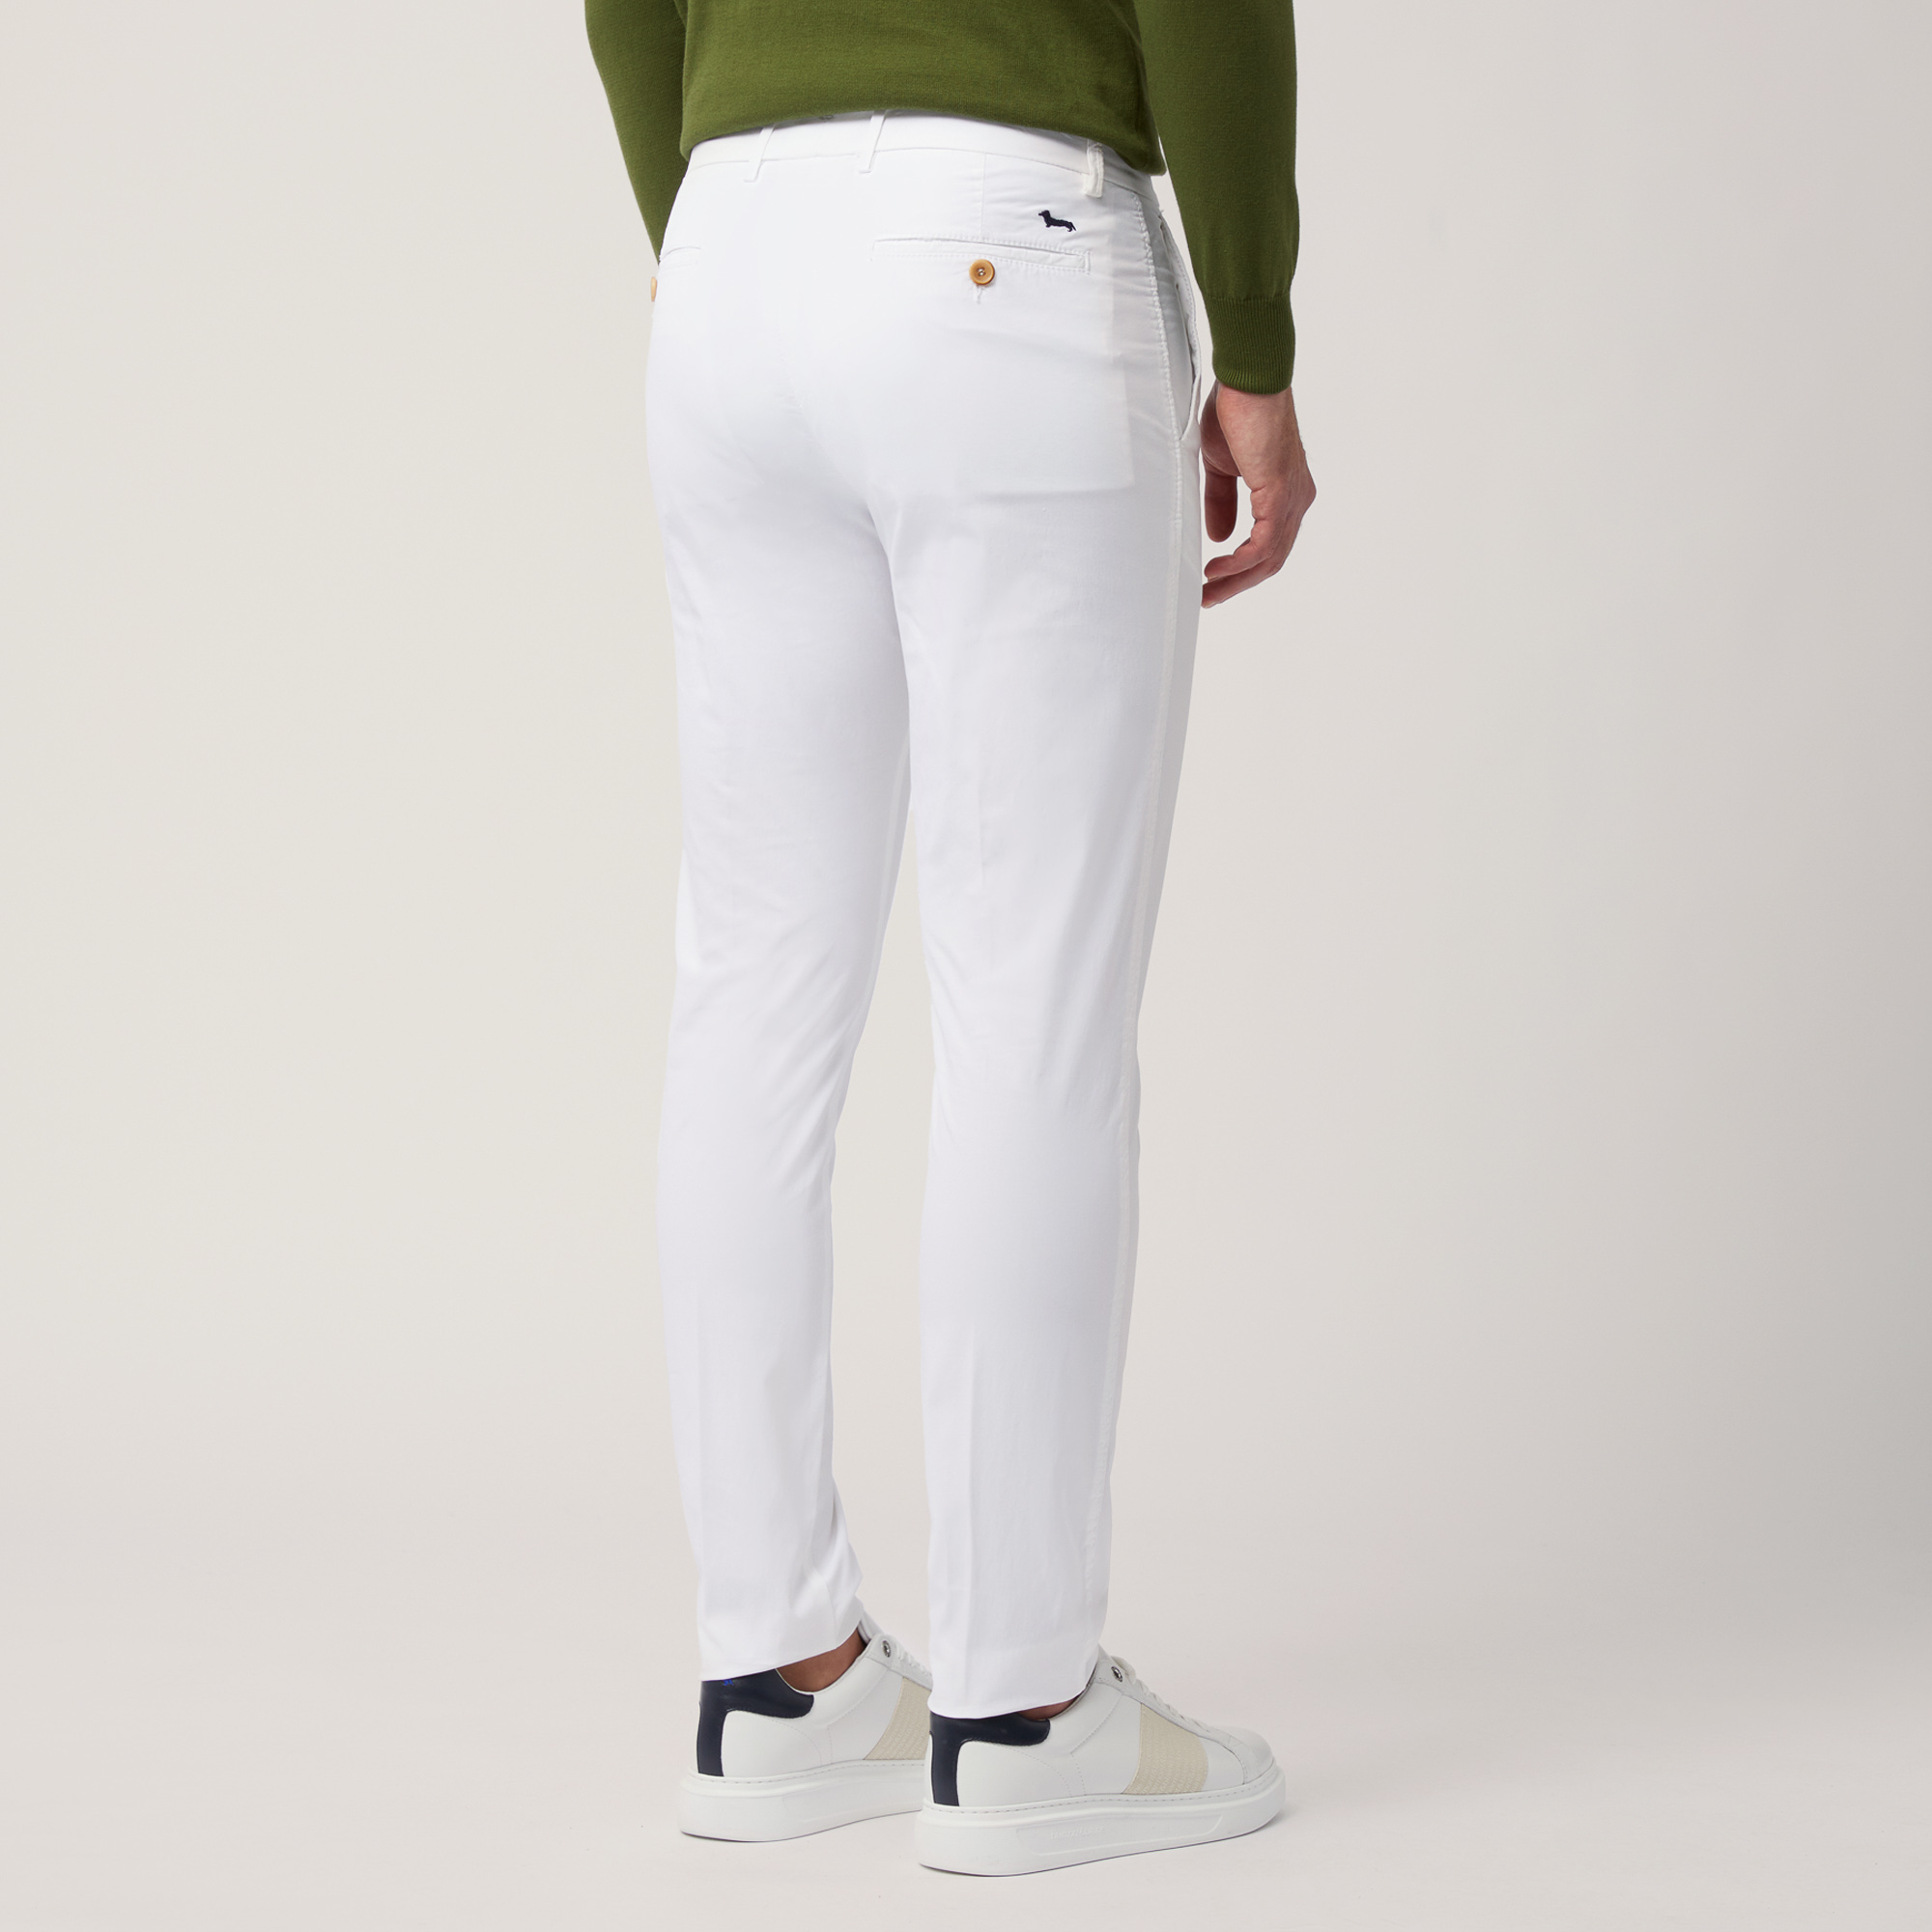 Narrow Fit Chino Pants, White, large image number 1